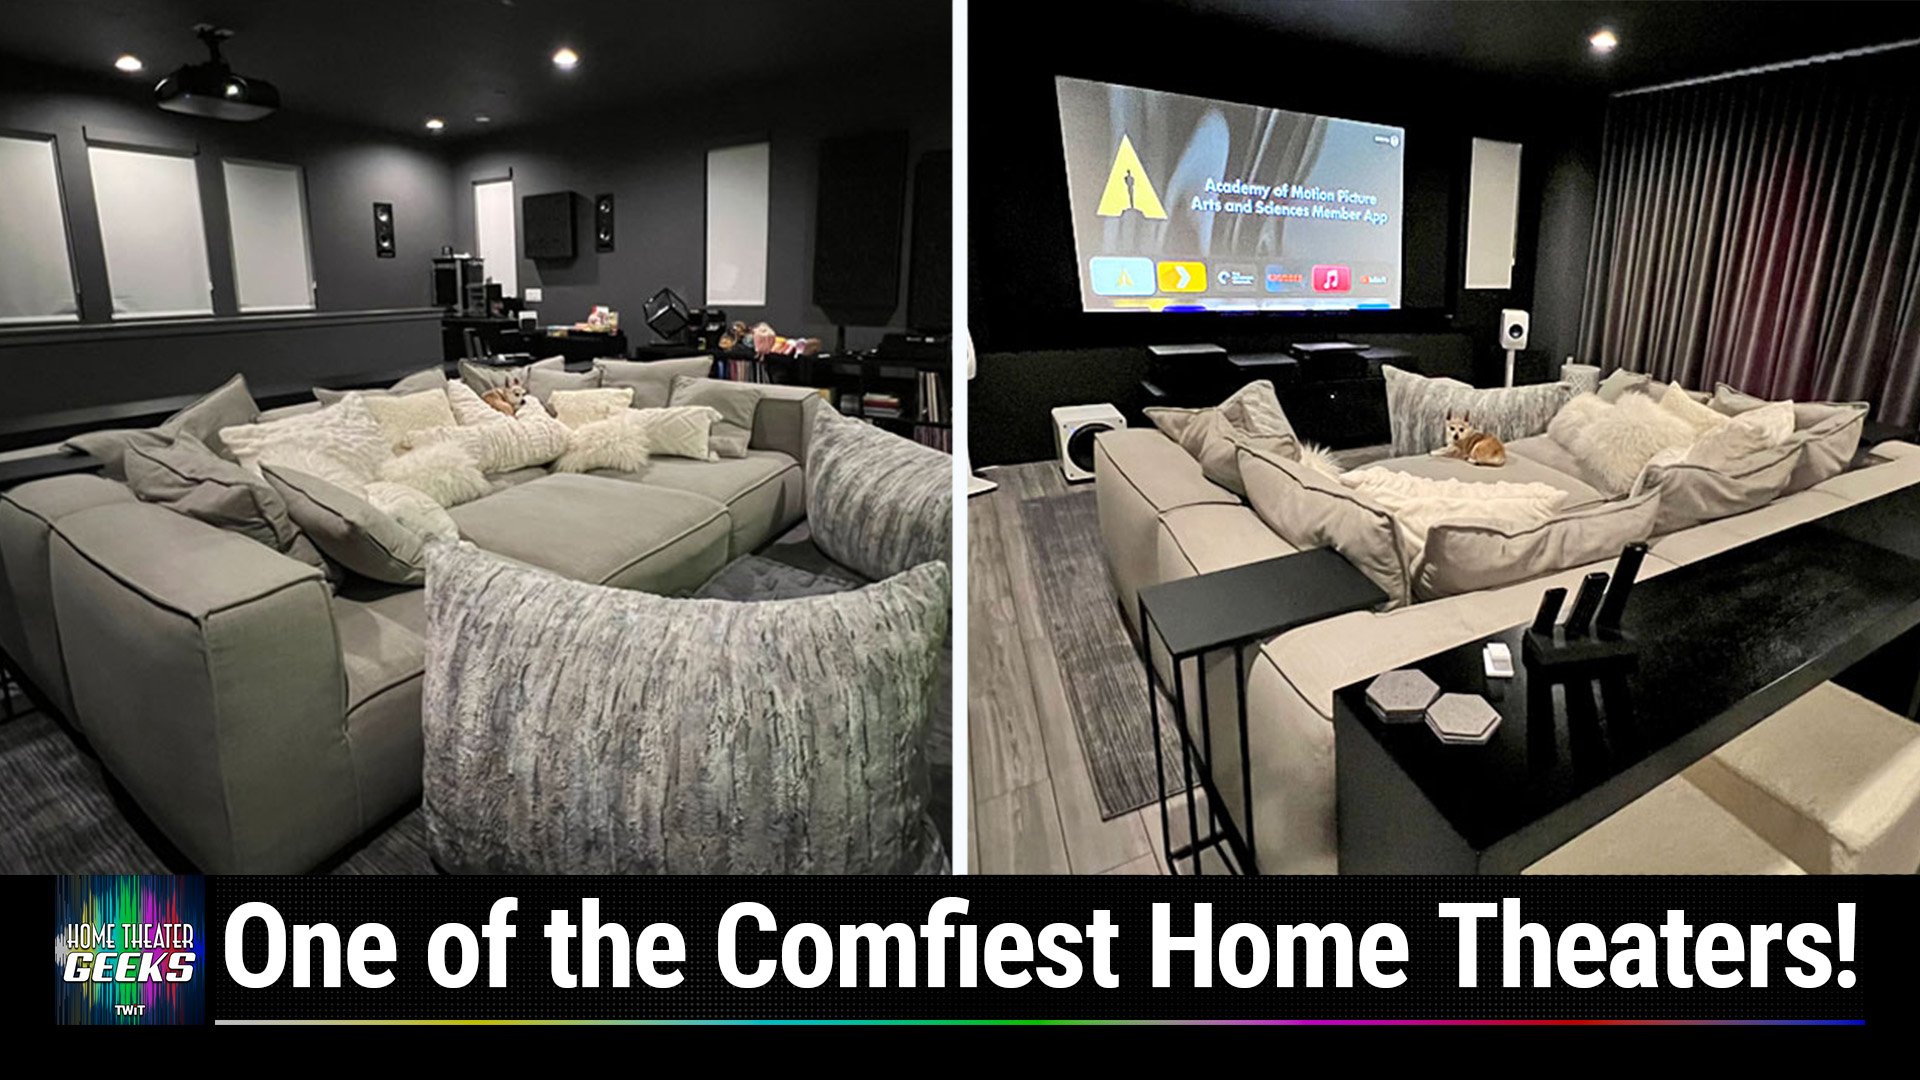 A Comfy Couch Home Theater! (Home Theater Geeks #440)